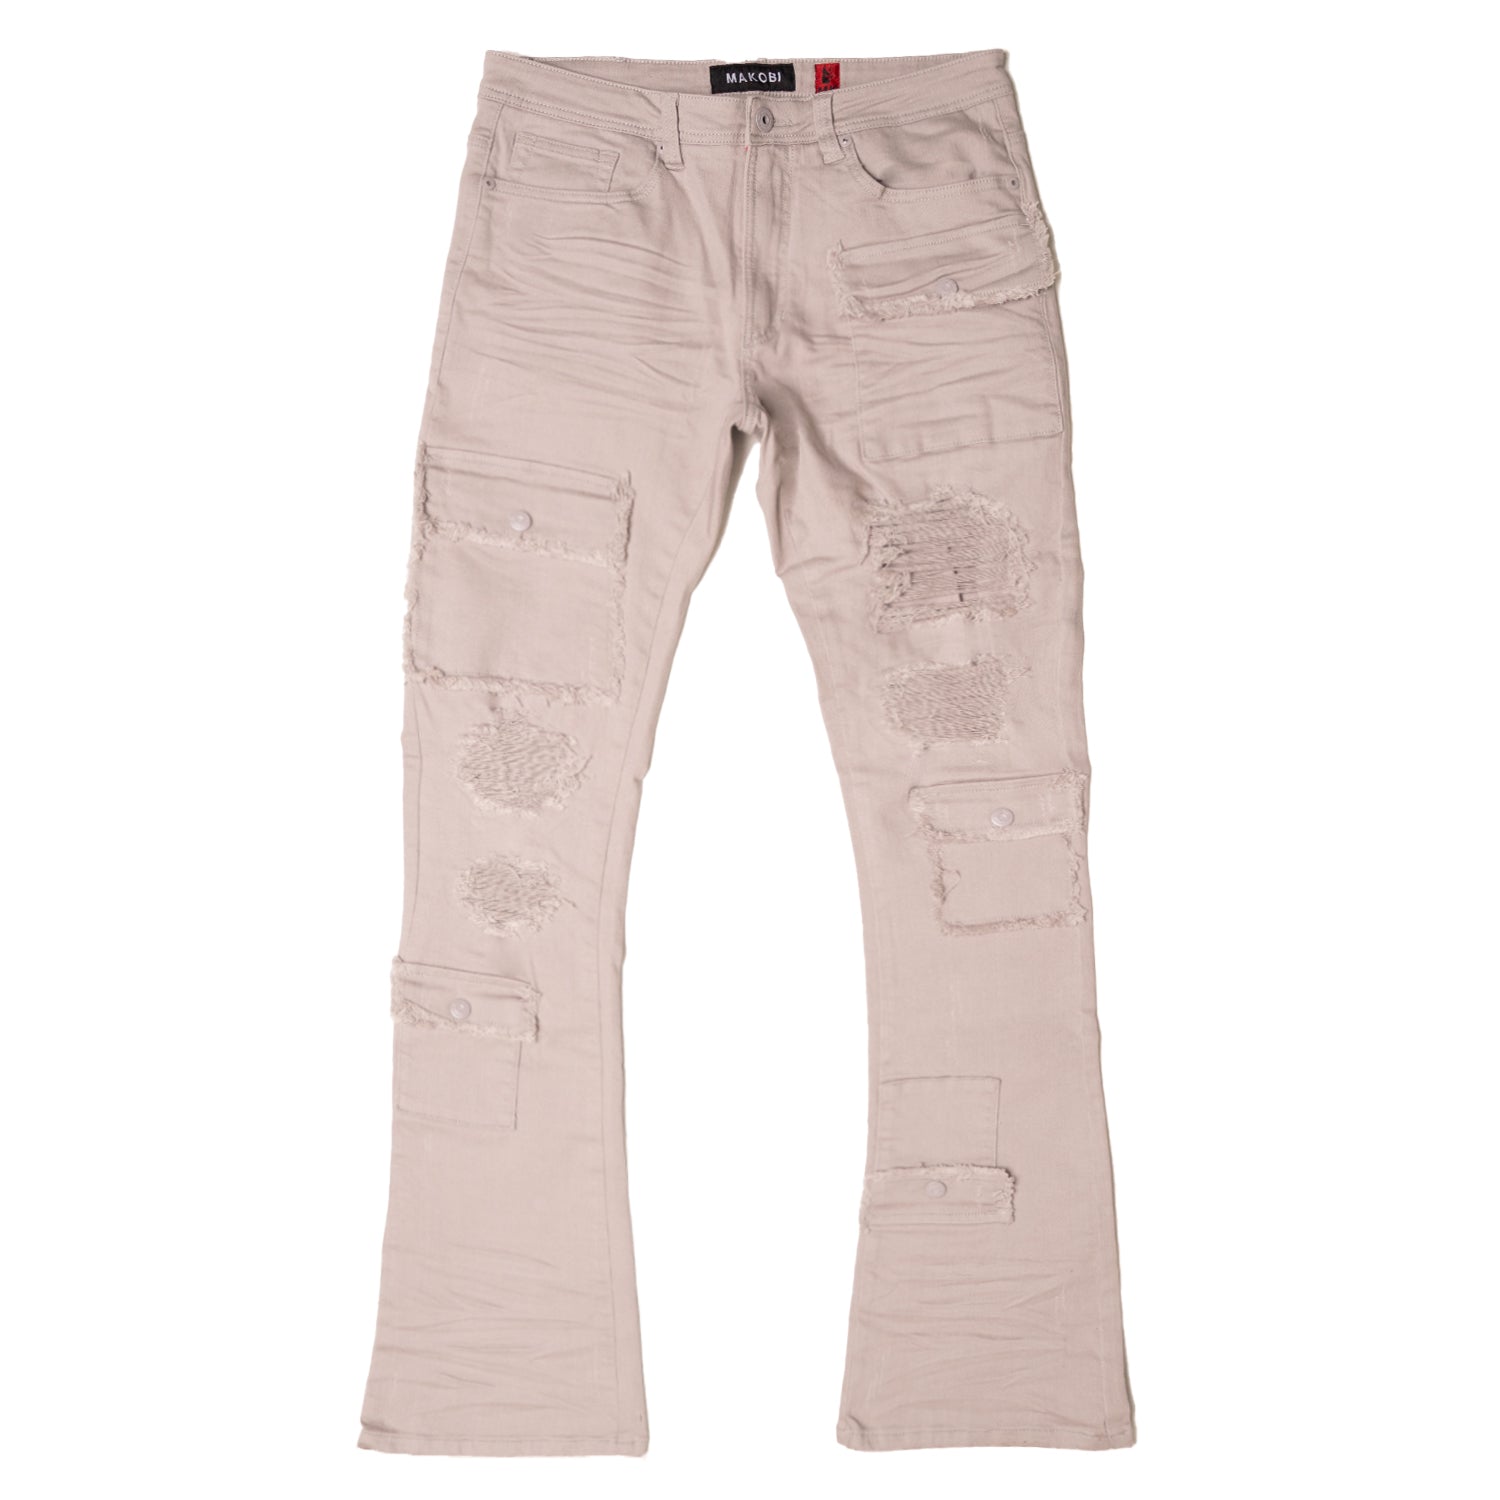 M1968 Cesare Stacked Jeans - Gray